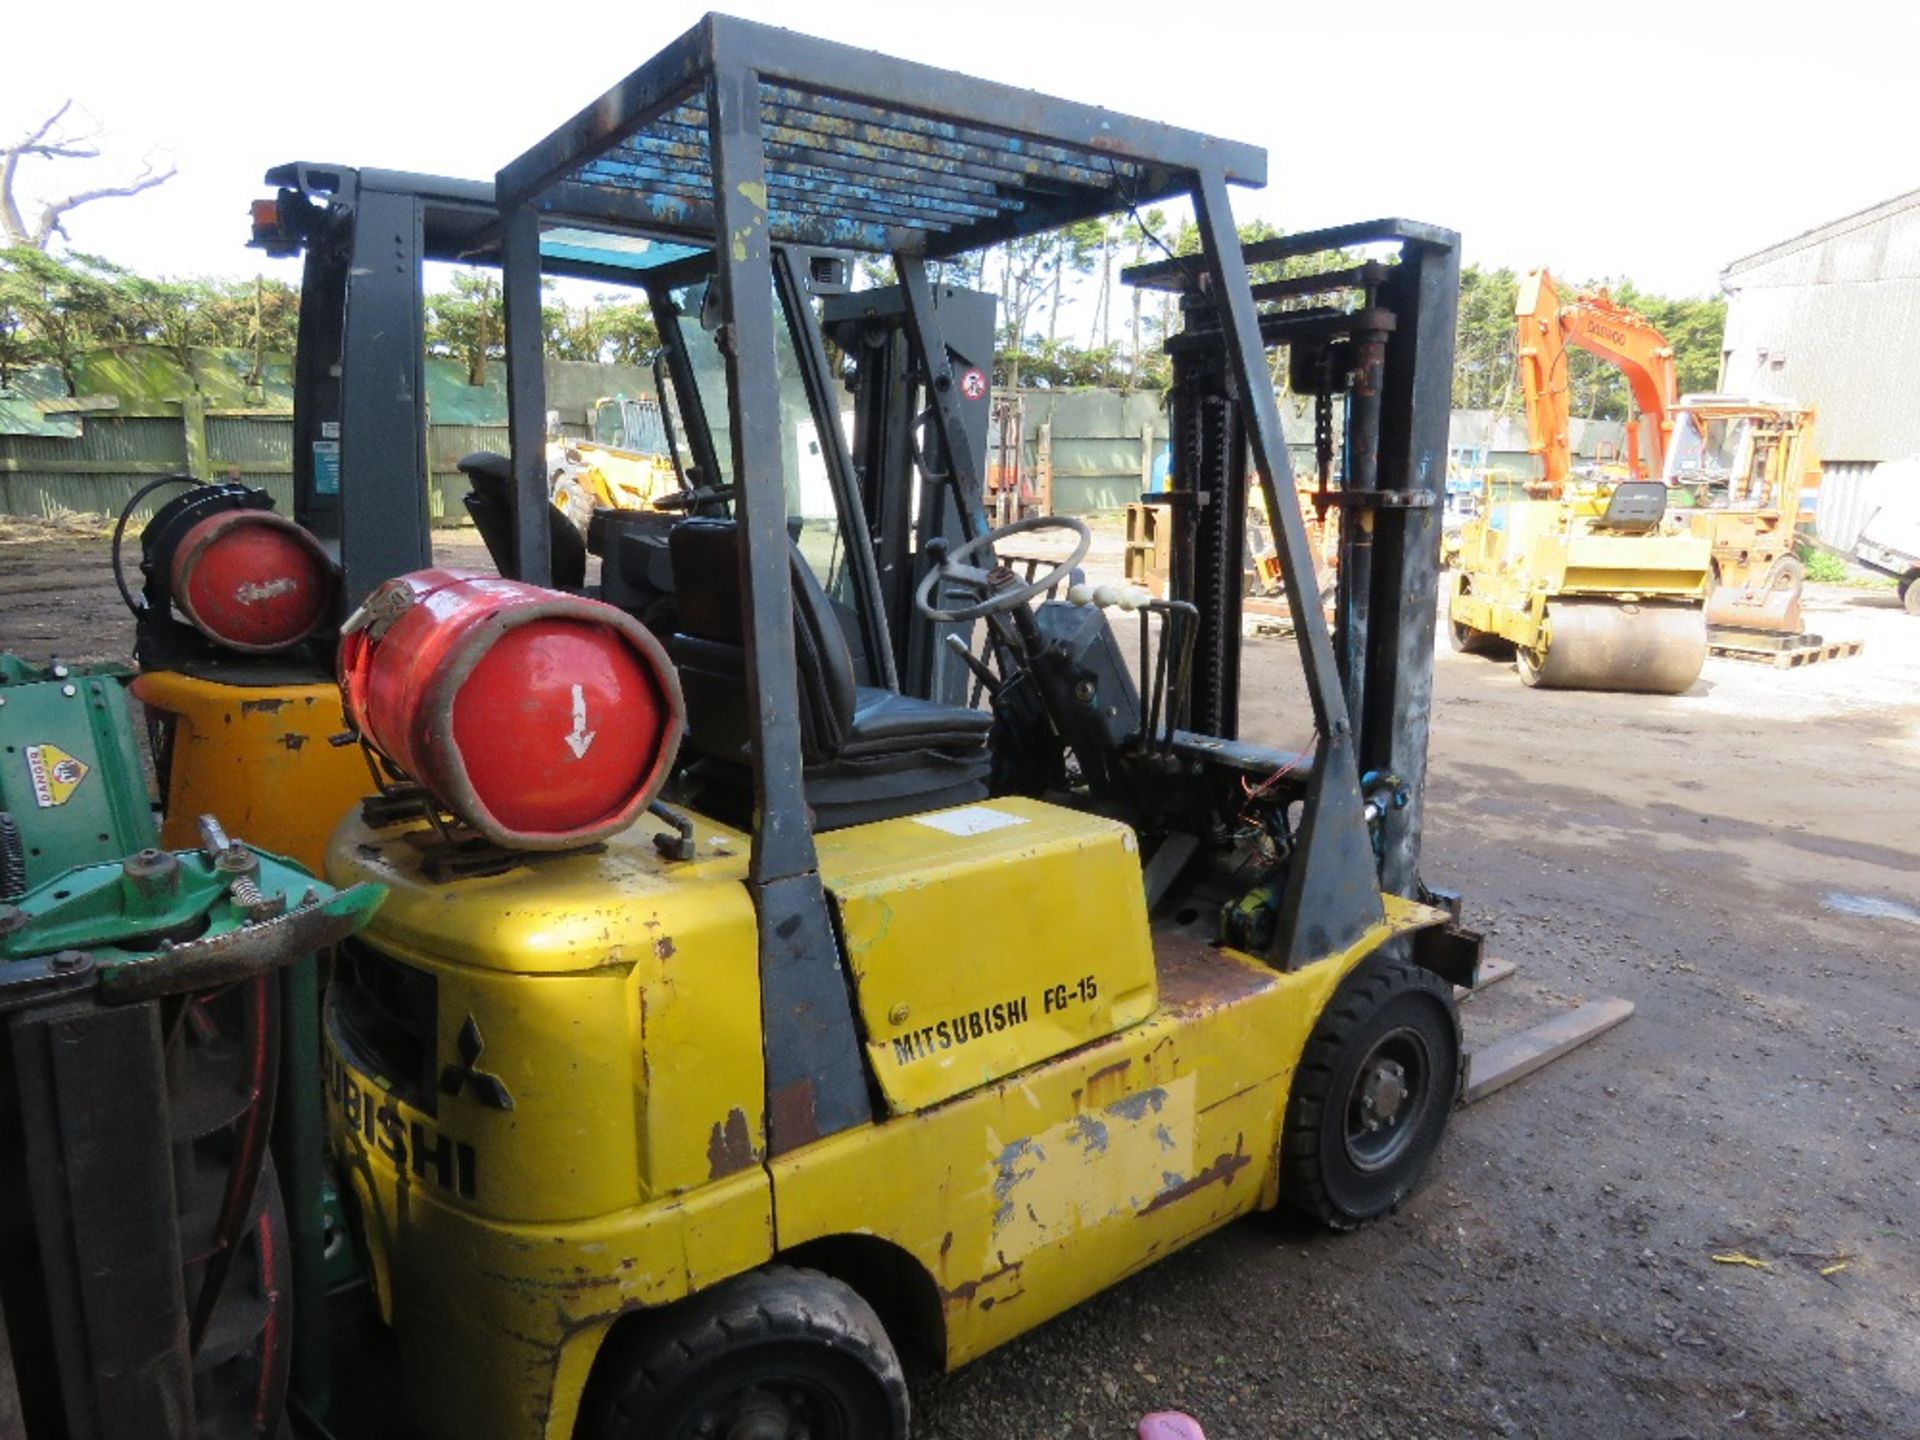 MITSUBISHI FG15 GAS POWERED FORKLIFT. WHEN TESTED WAS SEEN TO START AND RUN BRIEFLY BUT CUTTING OUT. - Image 6 of 8